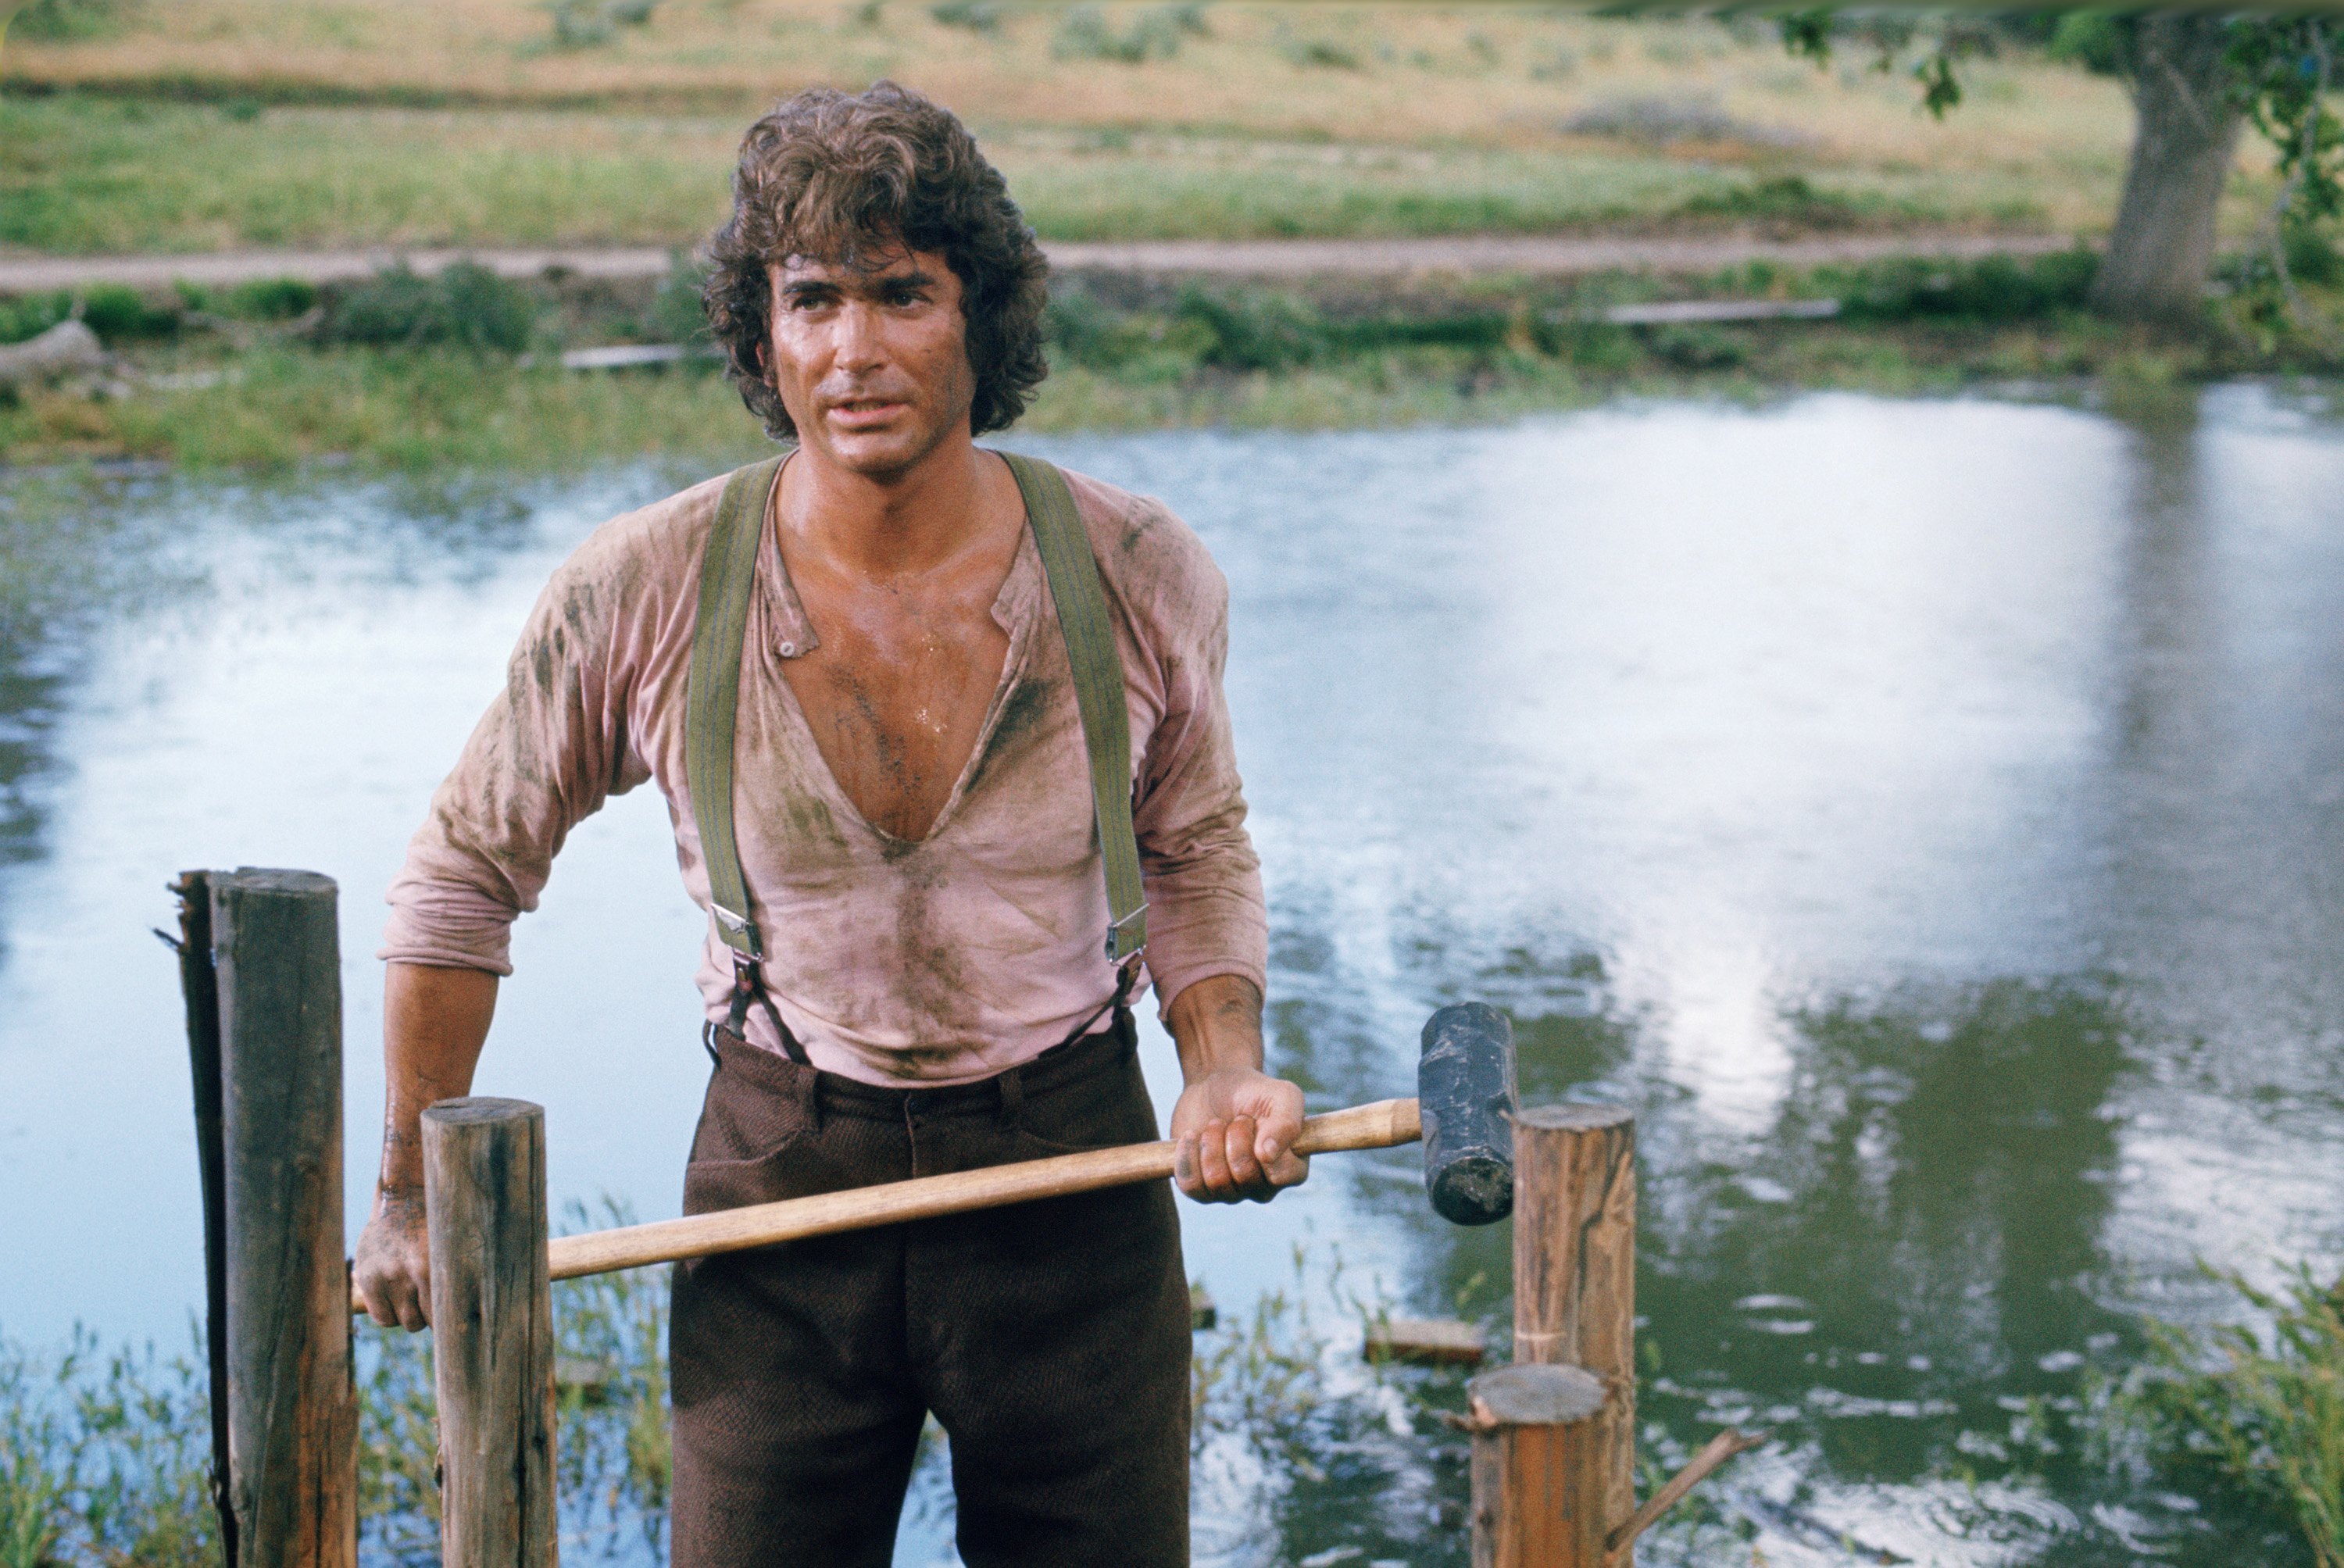 Michael Landon as Charles Ingalls in 'Little House on the Prairie', 1975